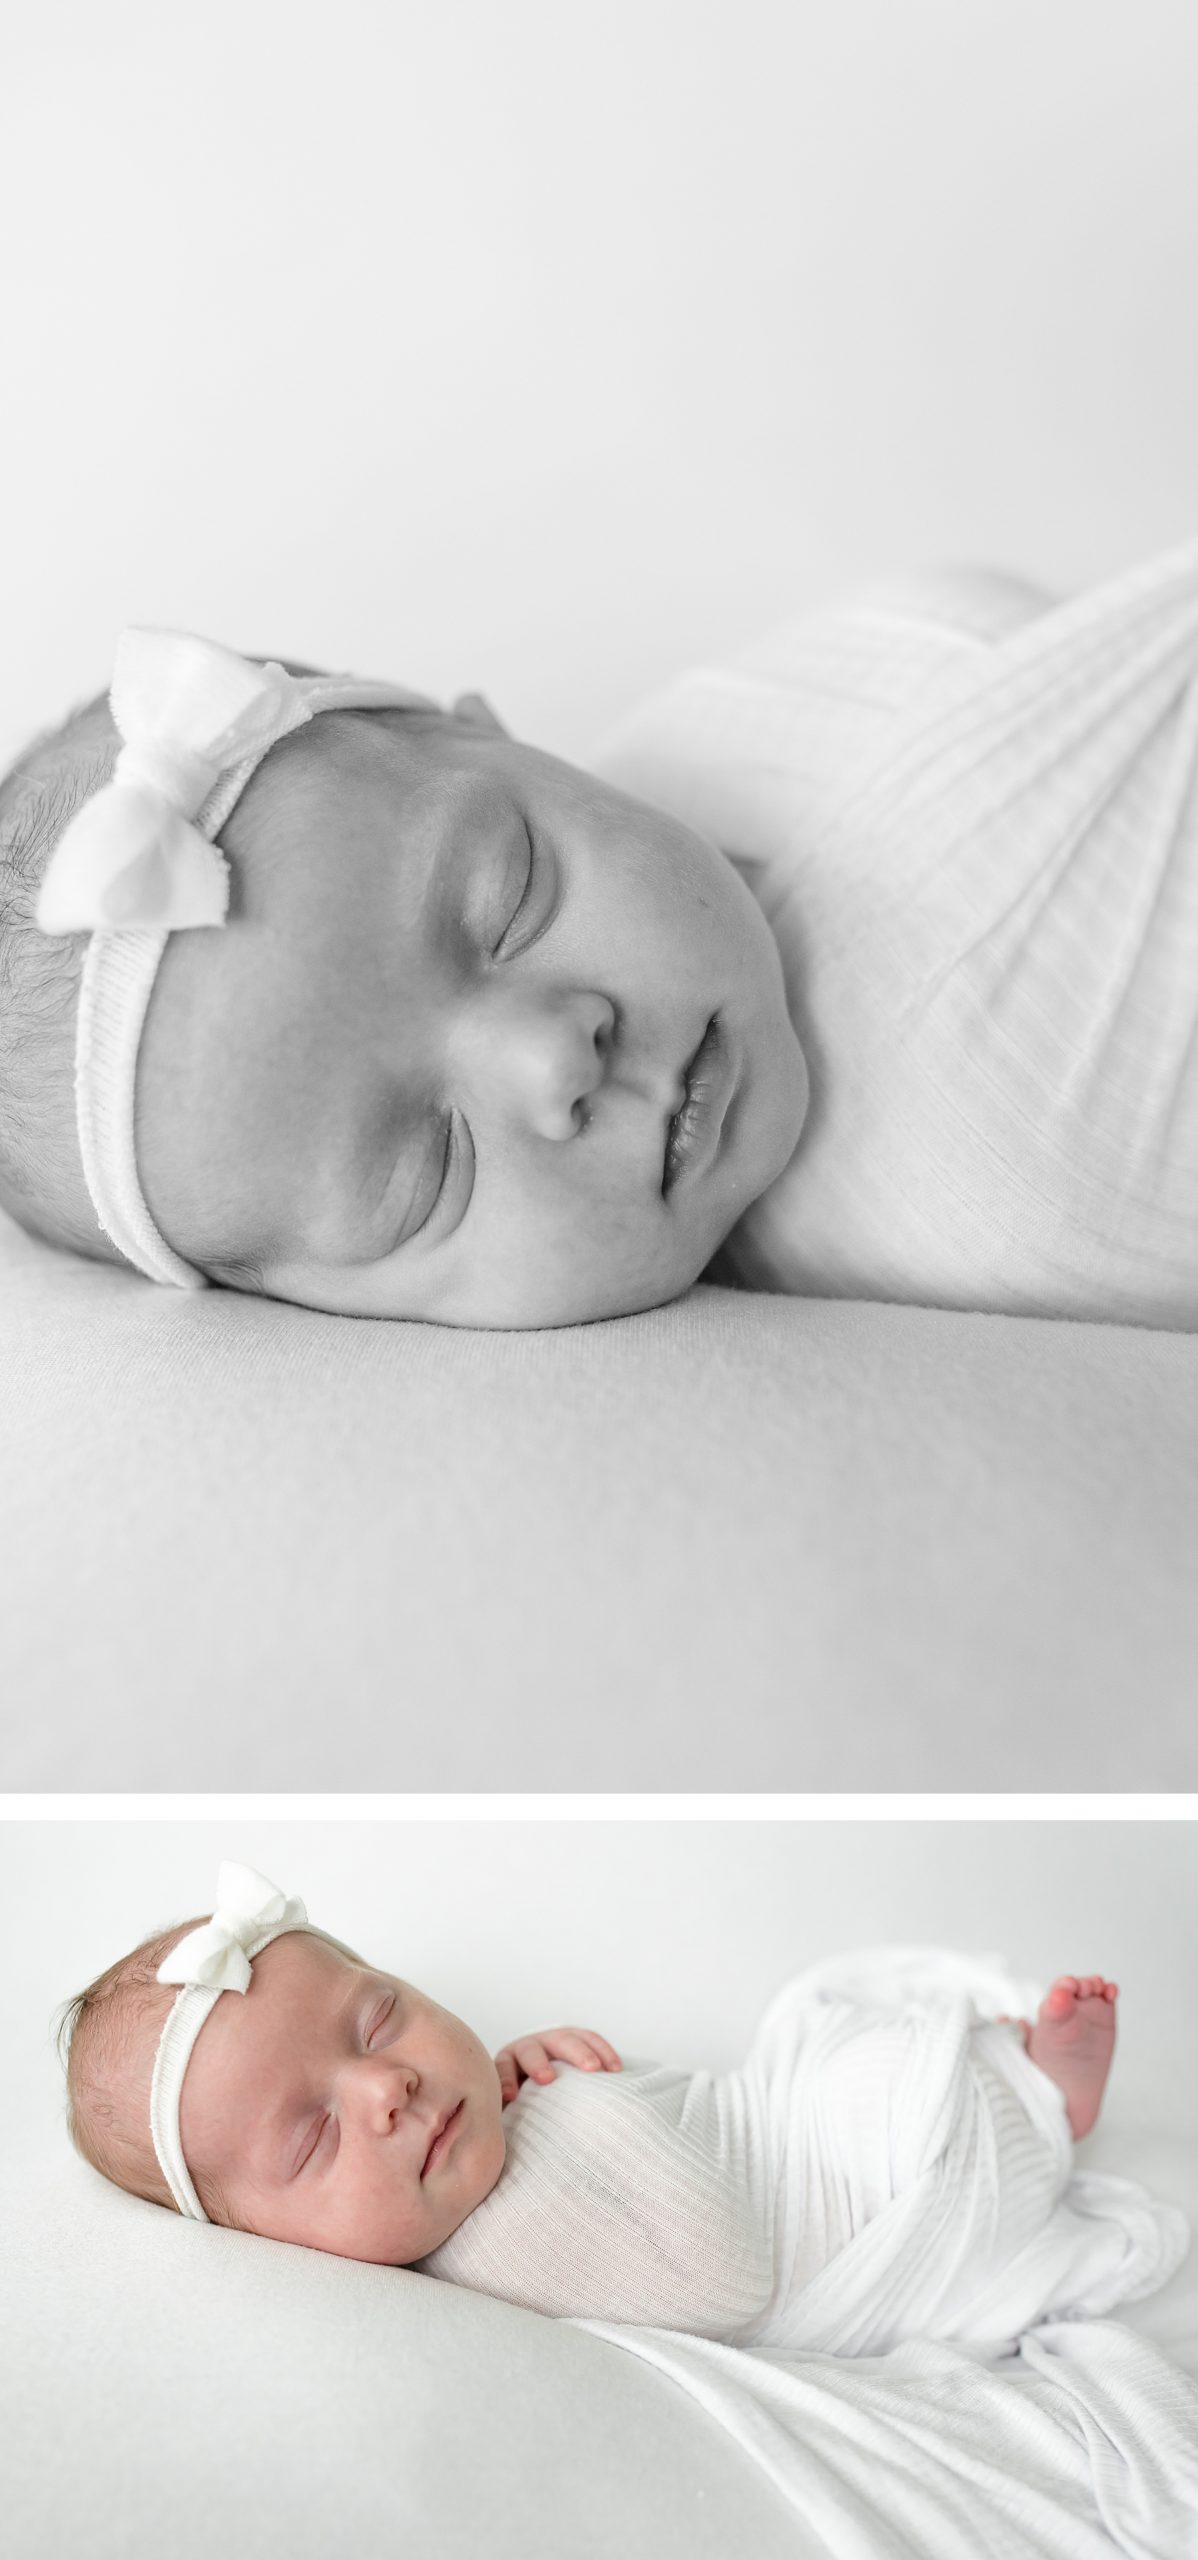 Newborn baby girl in white swaddle at in-home newborn session | Lindsey Dutton Photography | newborn photos, family photos at home, neutral family outfits | via lindseyduttonphotography.com